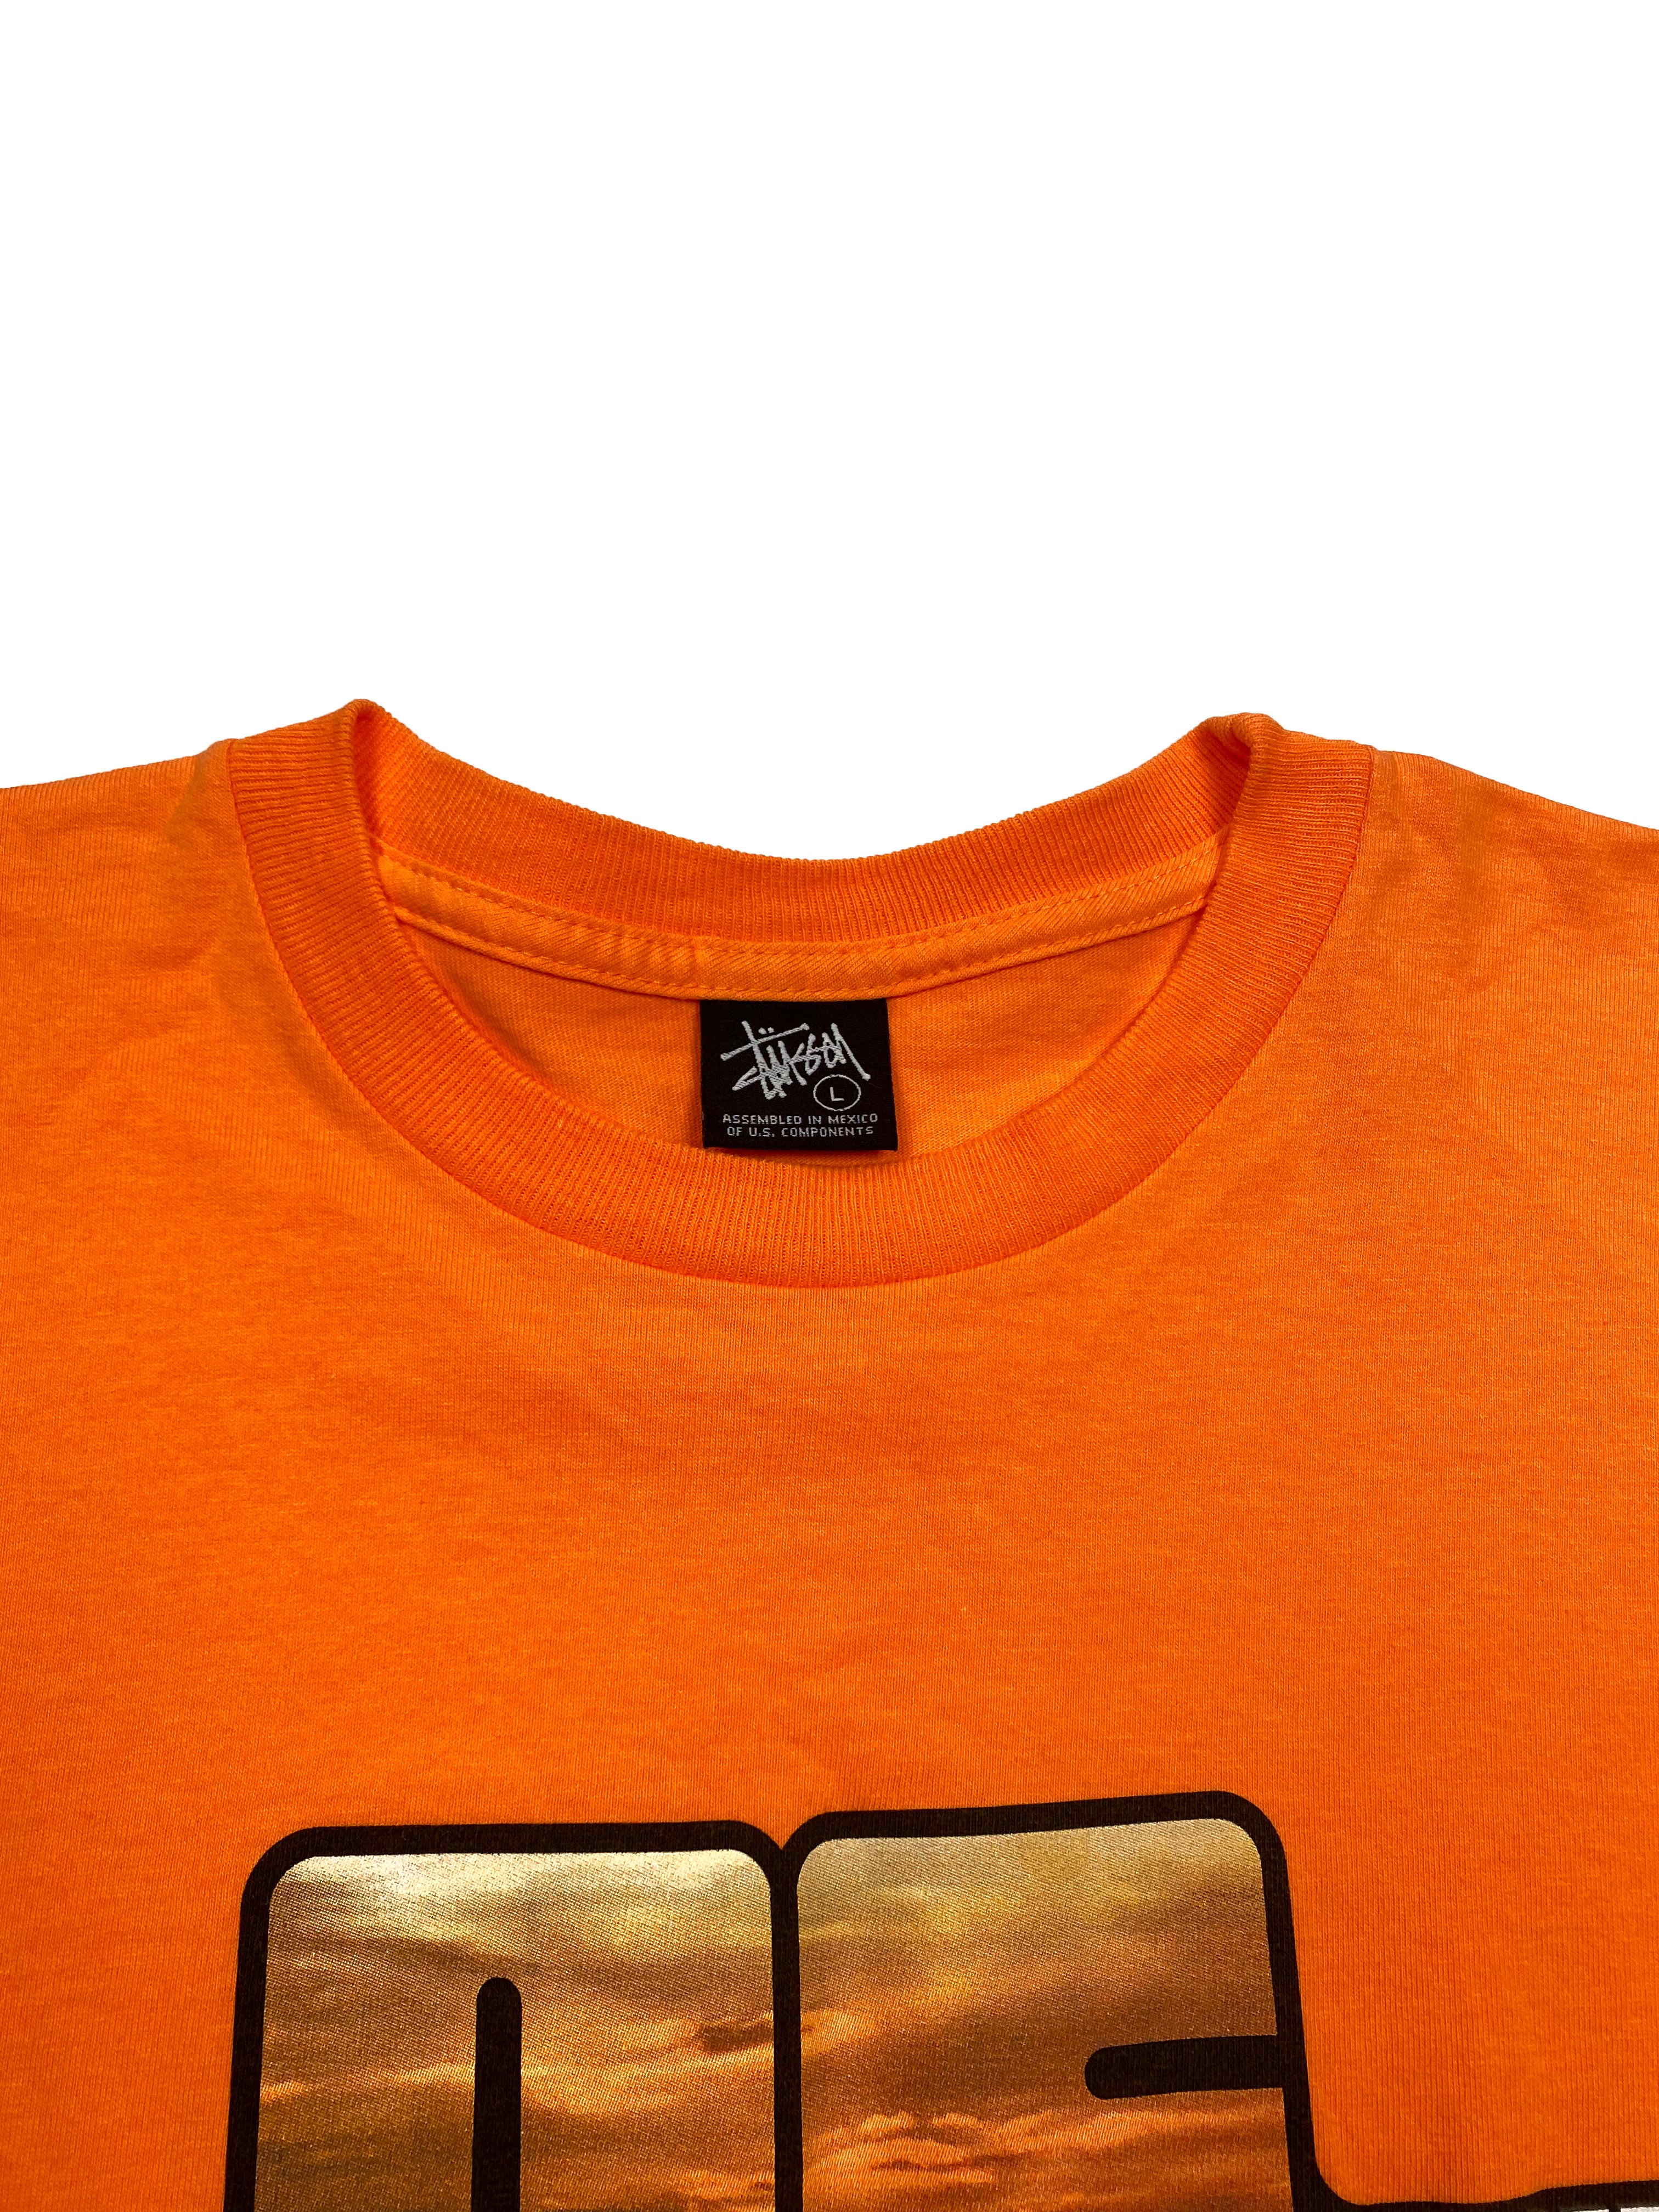 Stussy '96 Degrees in the shade' Orange T-shirt 00's